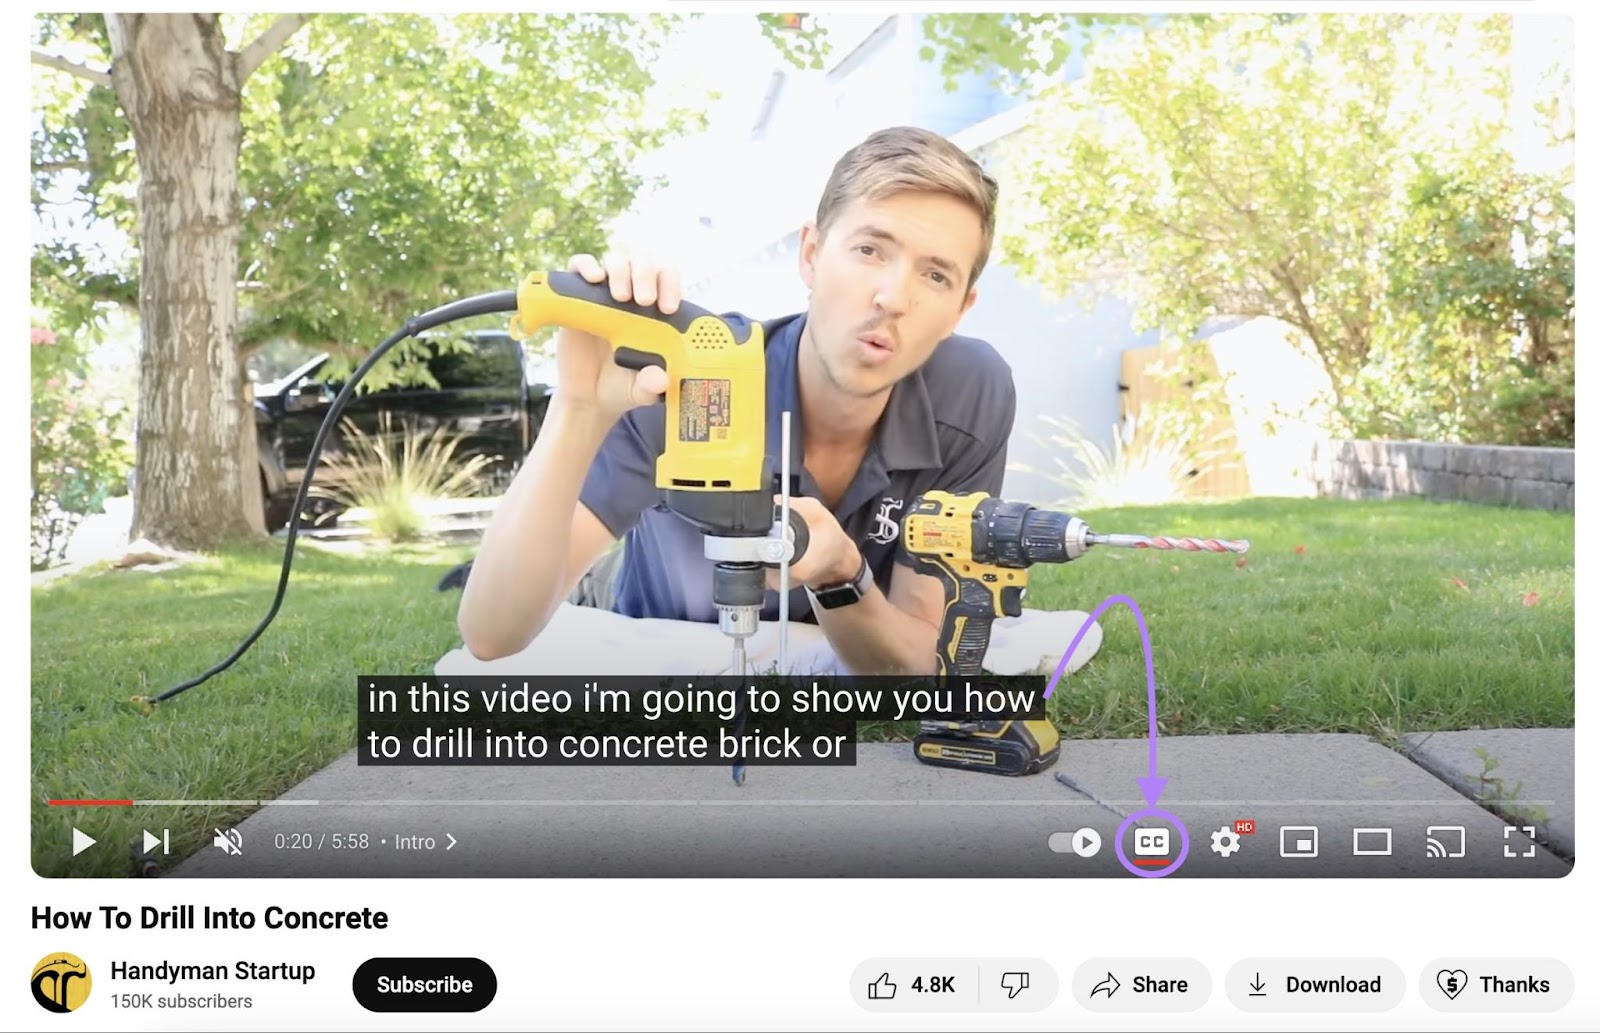 A YouTube video playing with captions turned on